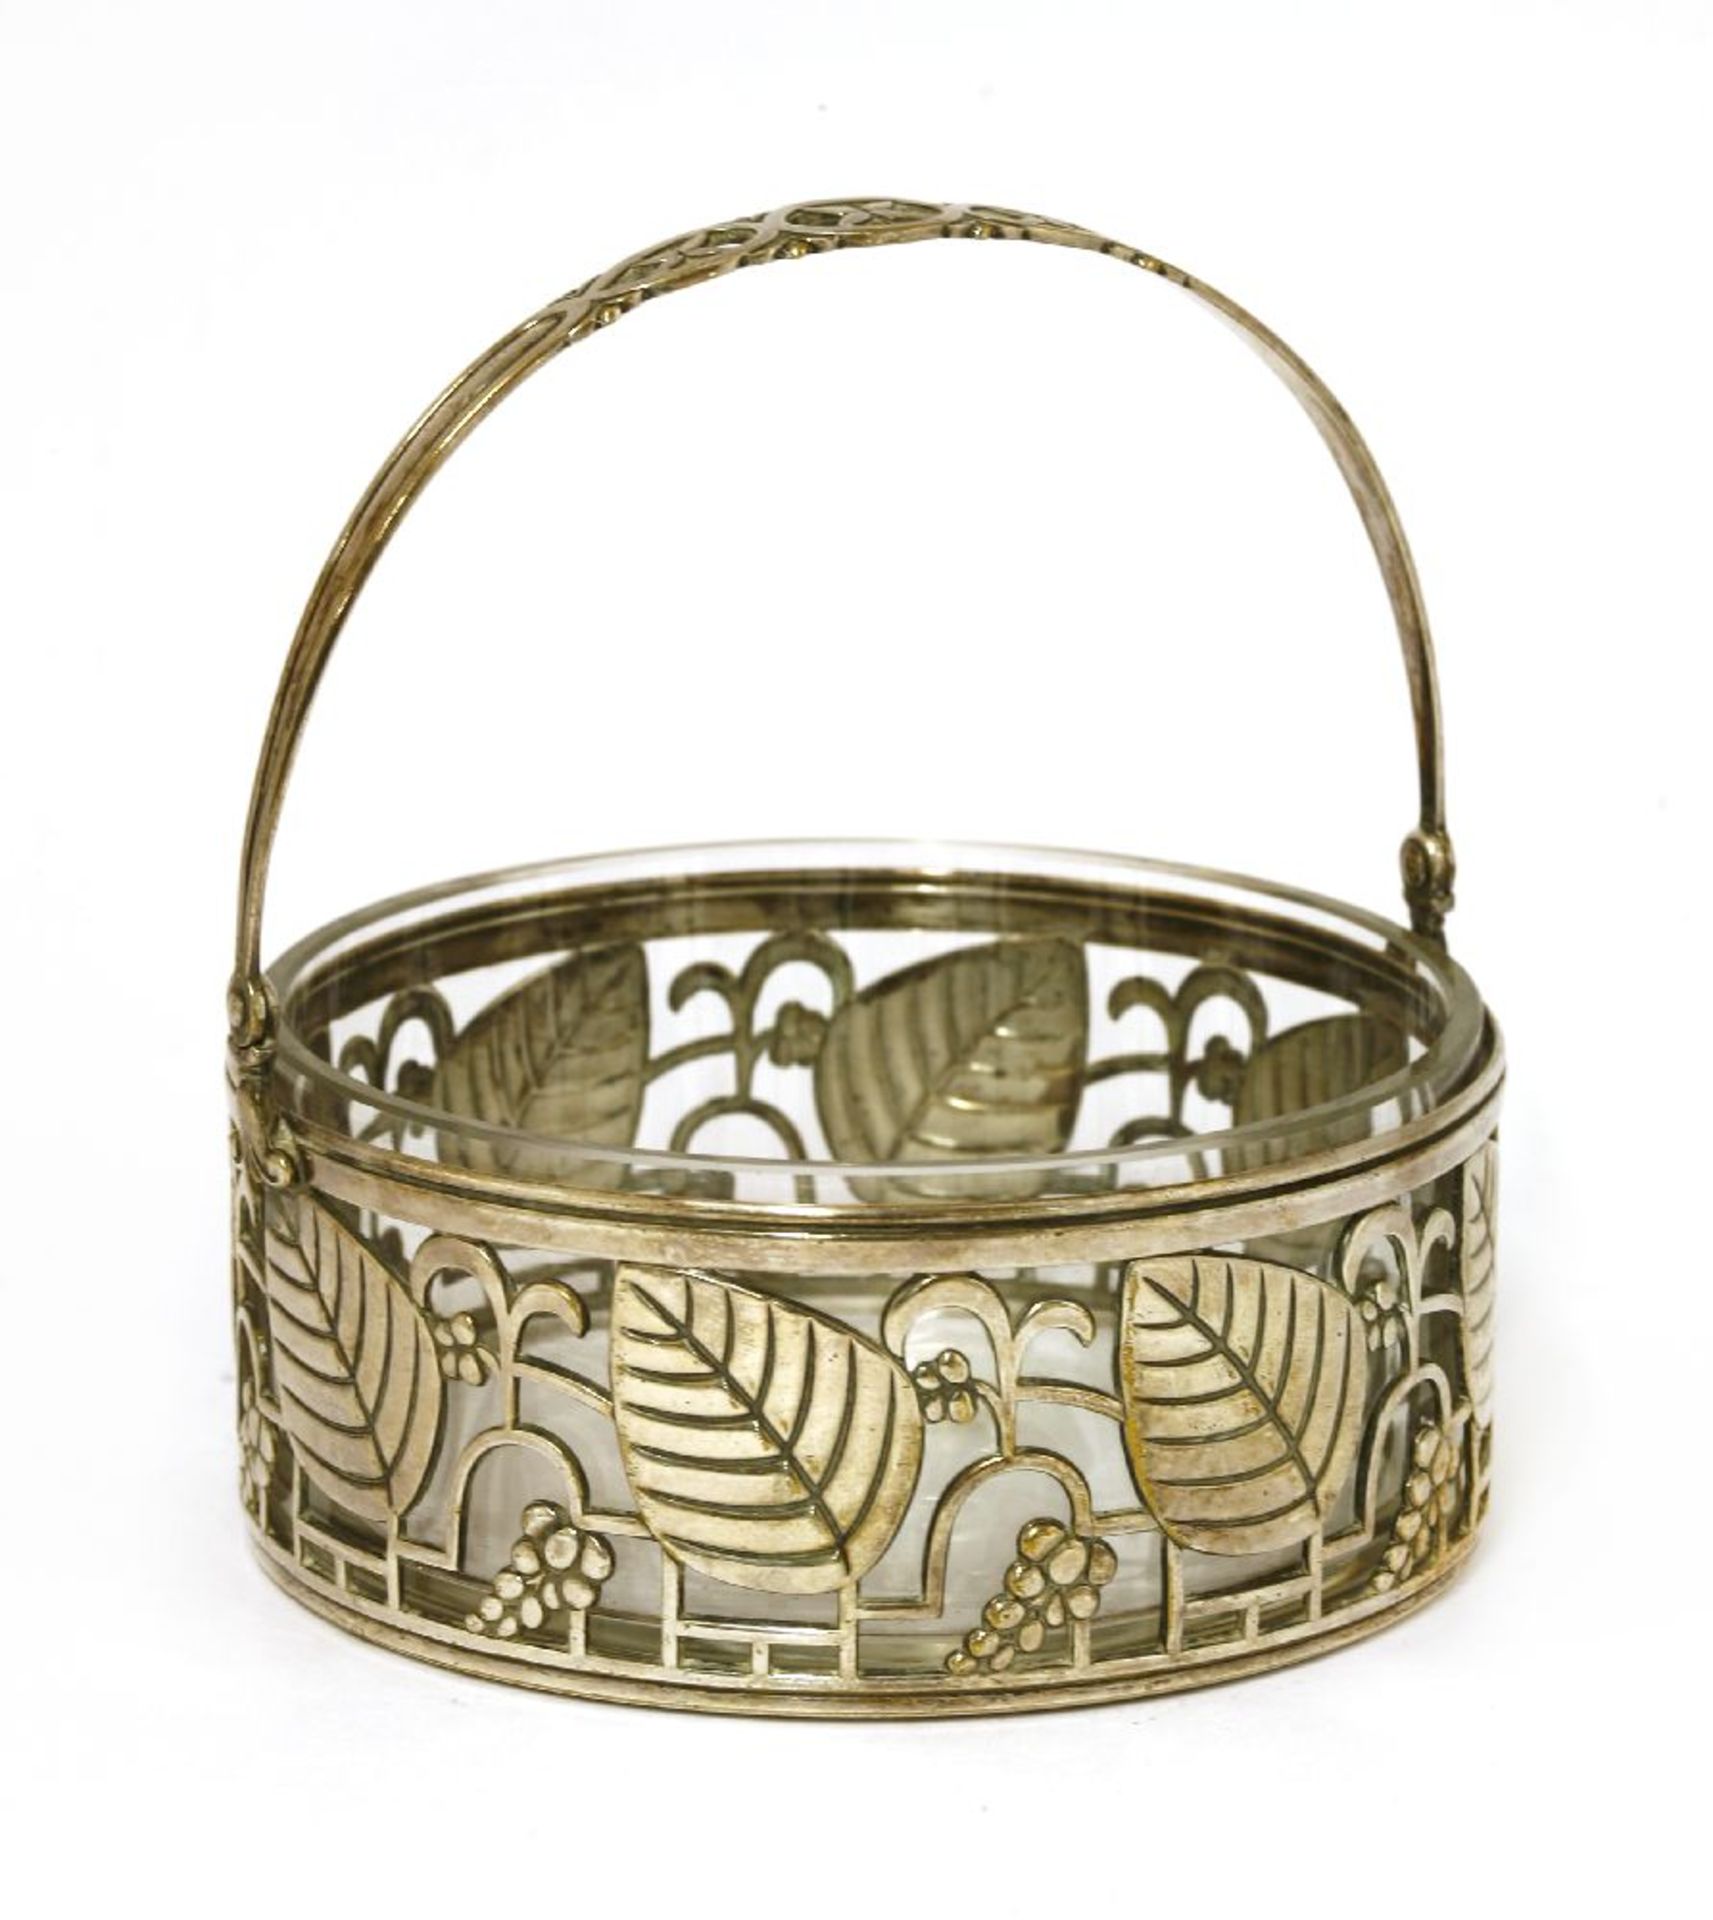 A WMF preserve basket,with pierced designs, a swing handle and a clear glass liner,14cm high